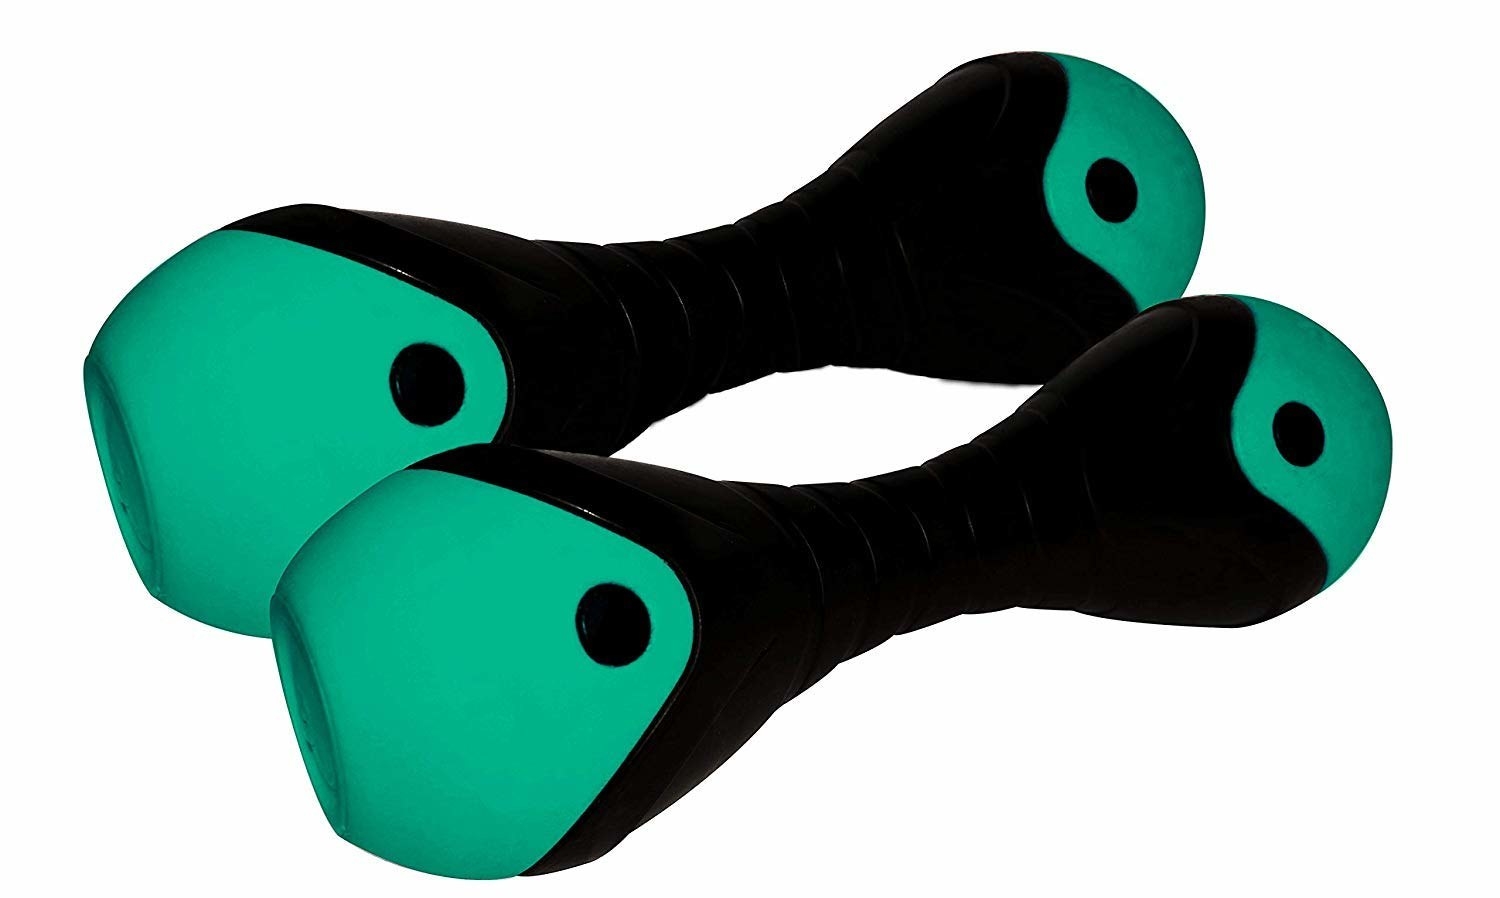 A pair of green and black dumbbells. 